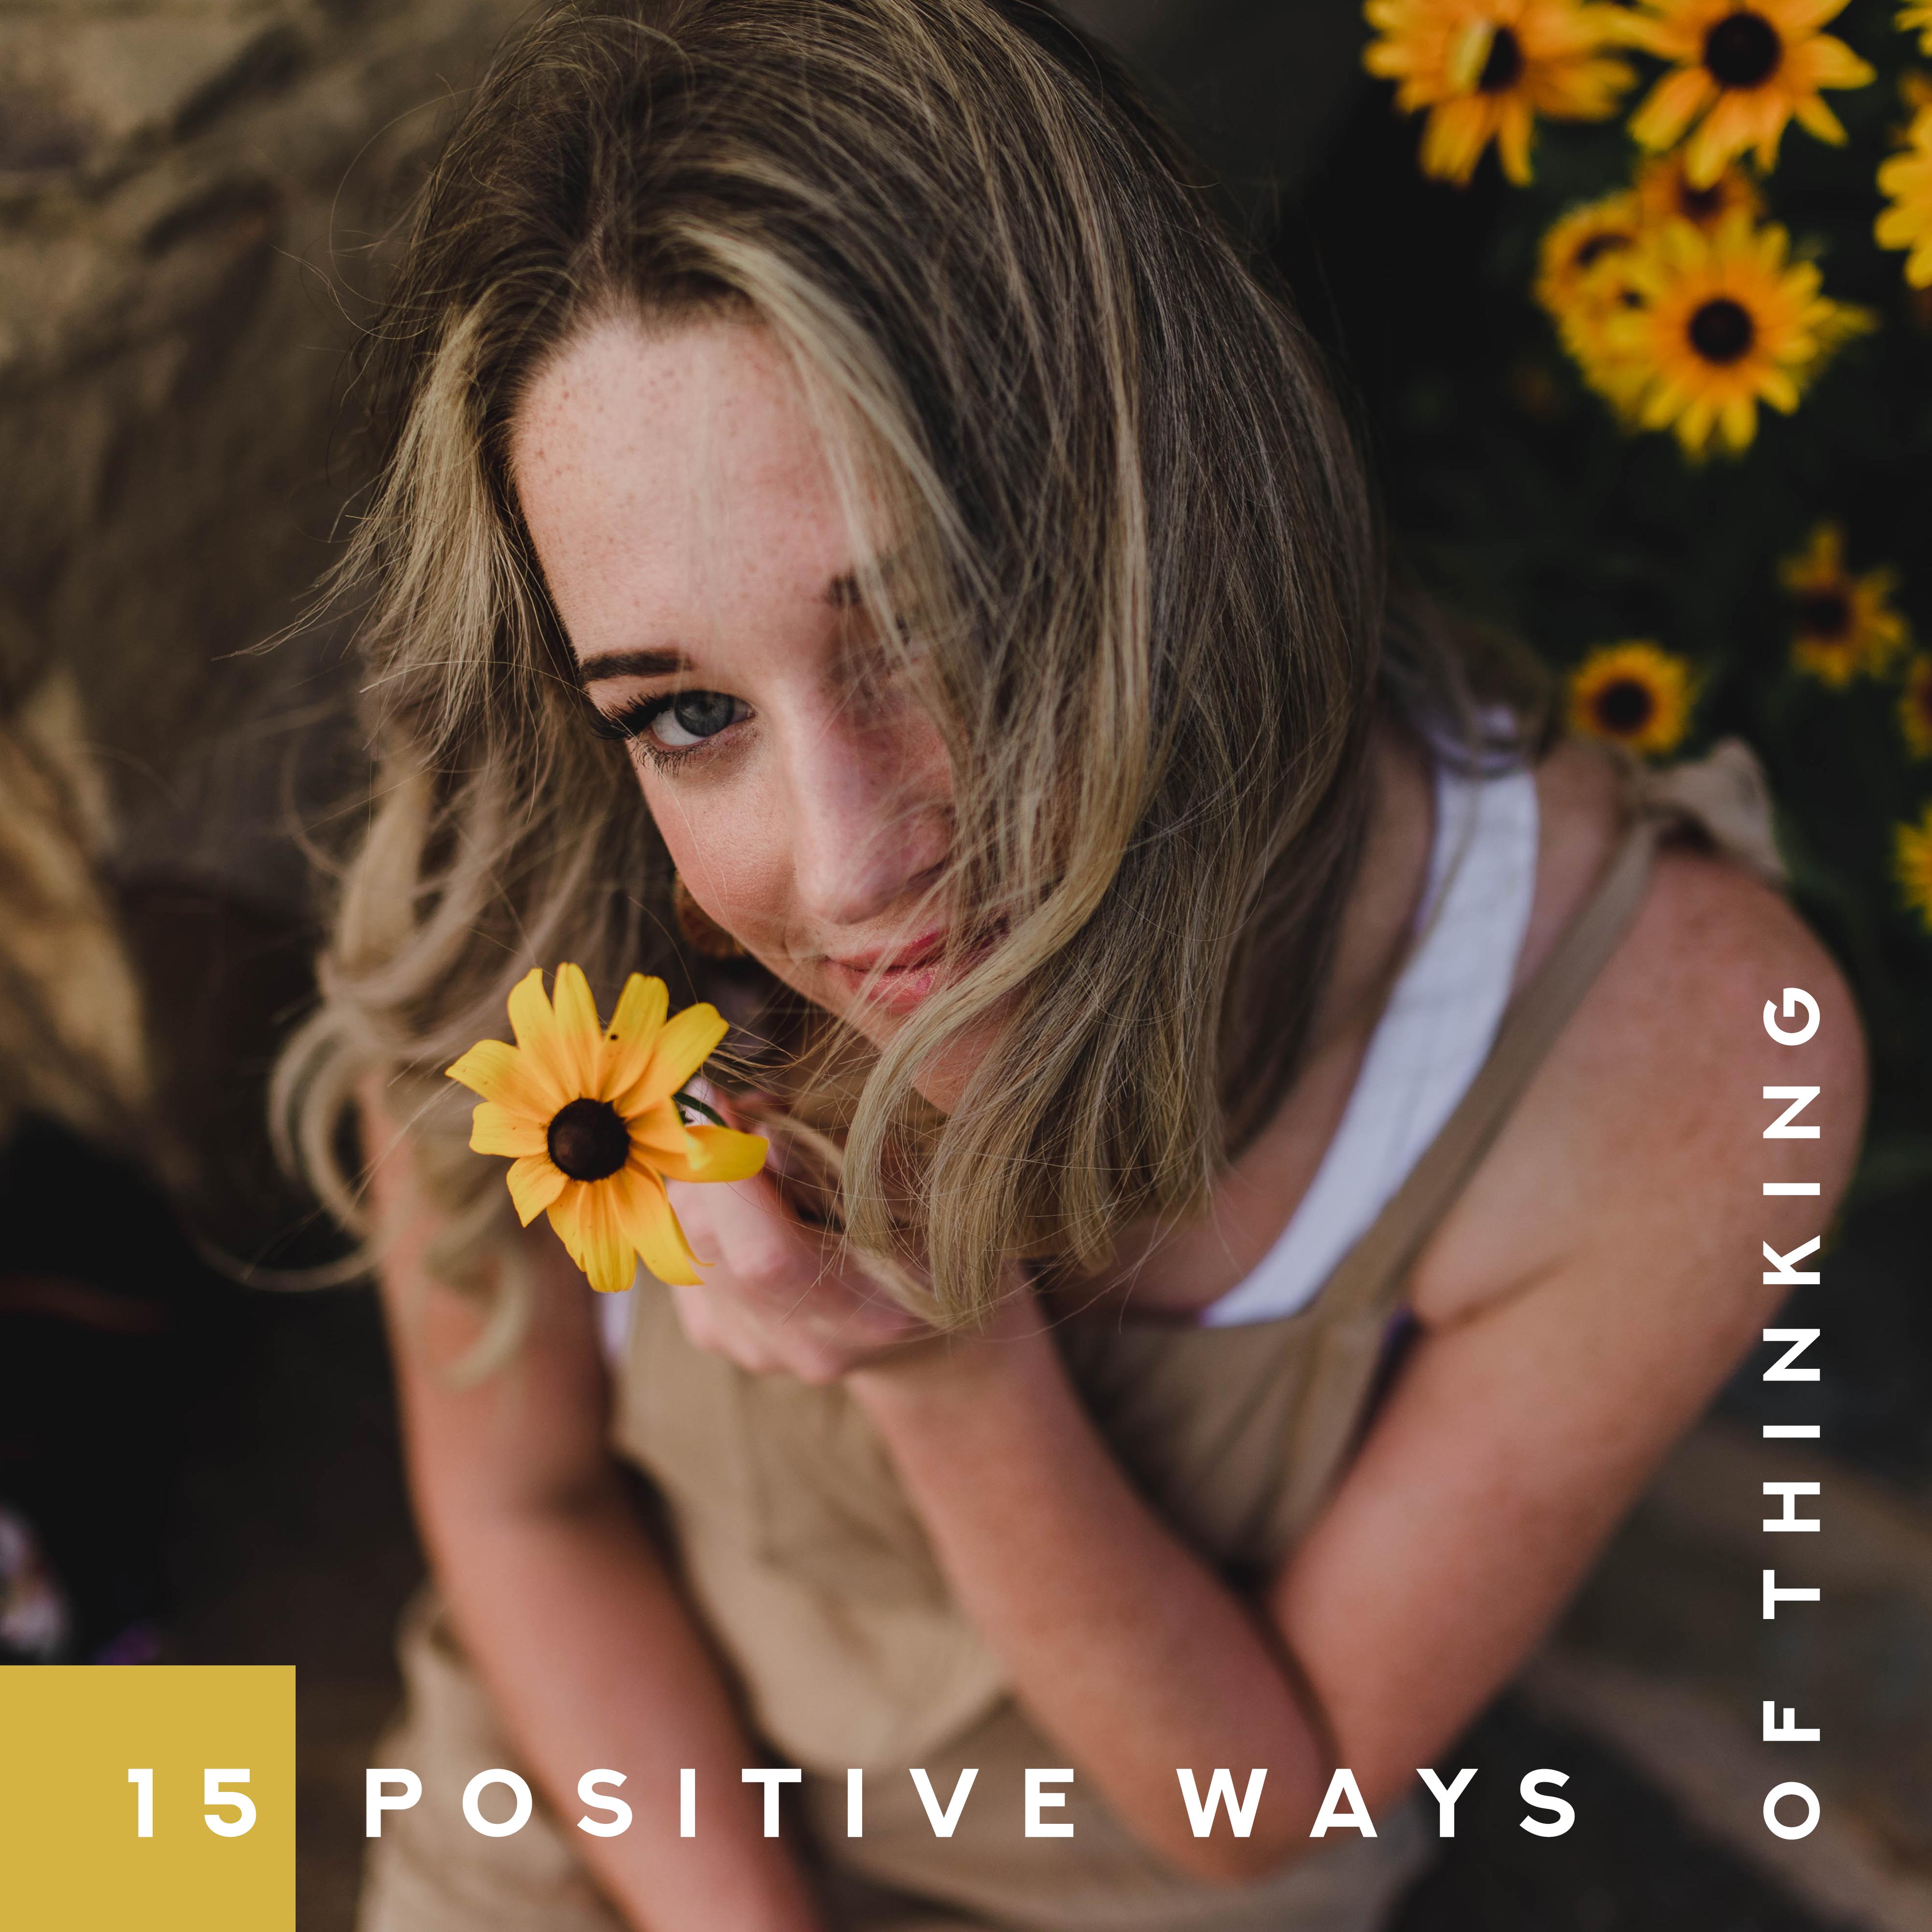 15 Positive Ways of Thinking: New Age 2019 Music for Better Mood, Positive Thinking About Your Life, Fight with Problems & Depression, Anti-stress Sounds